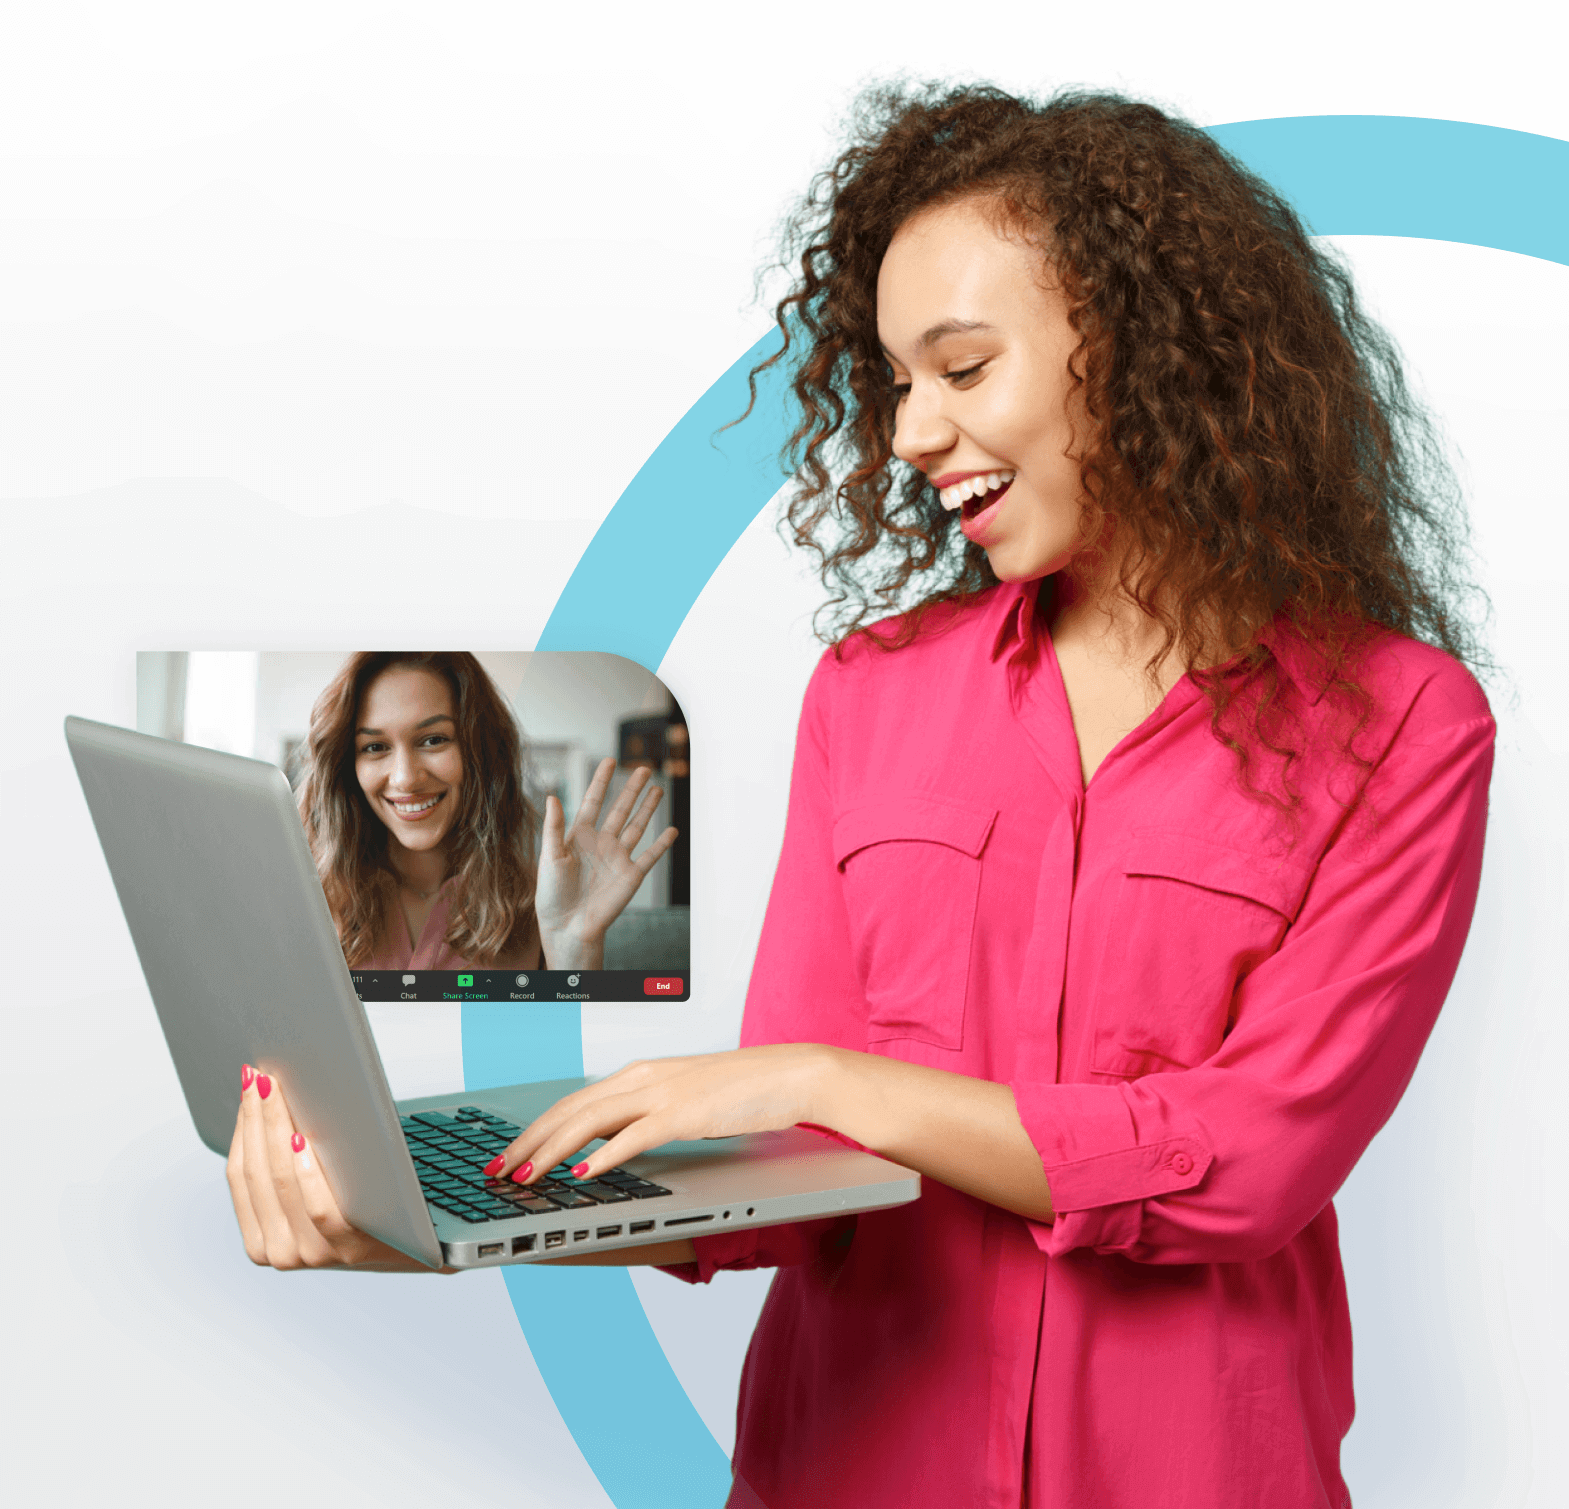 Woman on laptop that shows her engaging in a video call